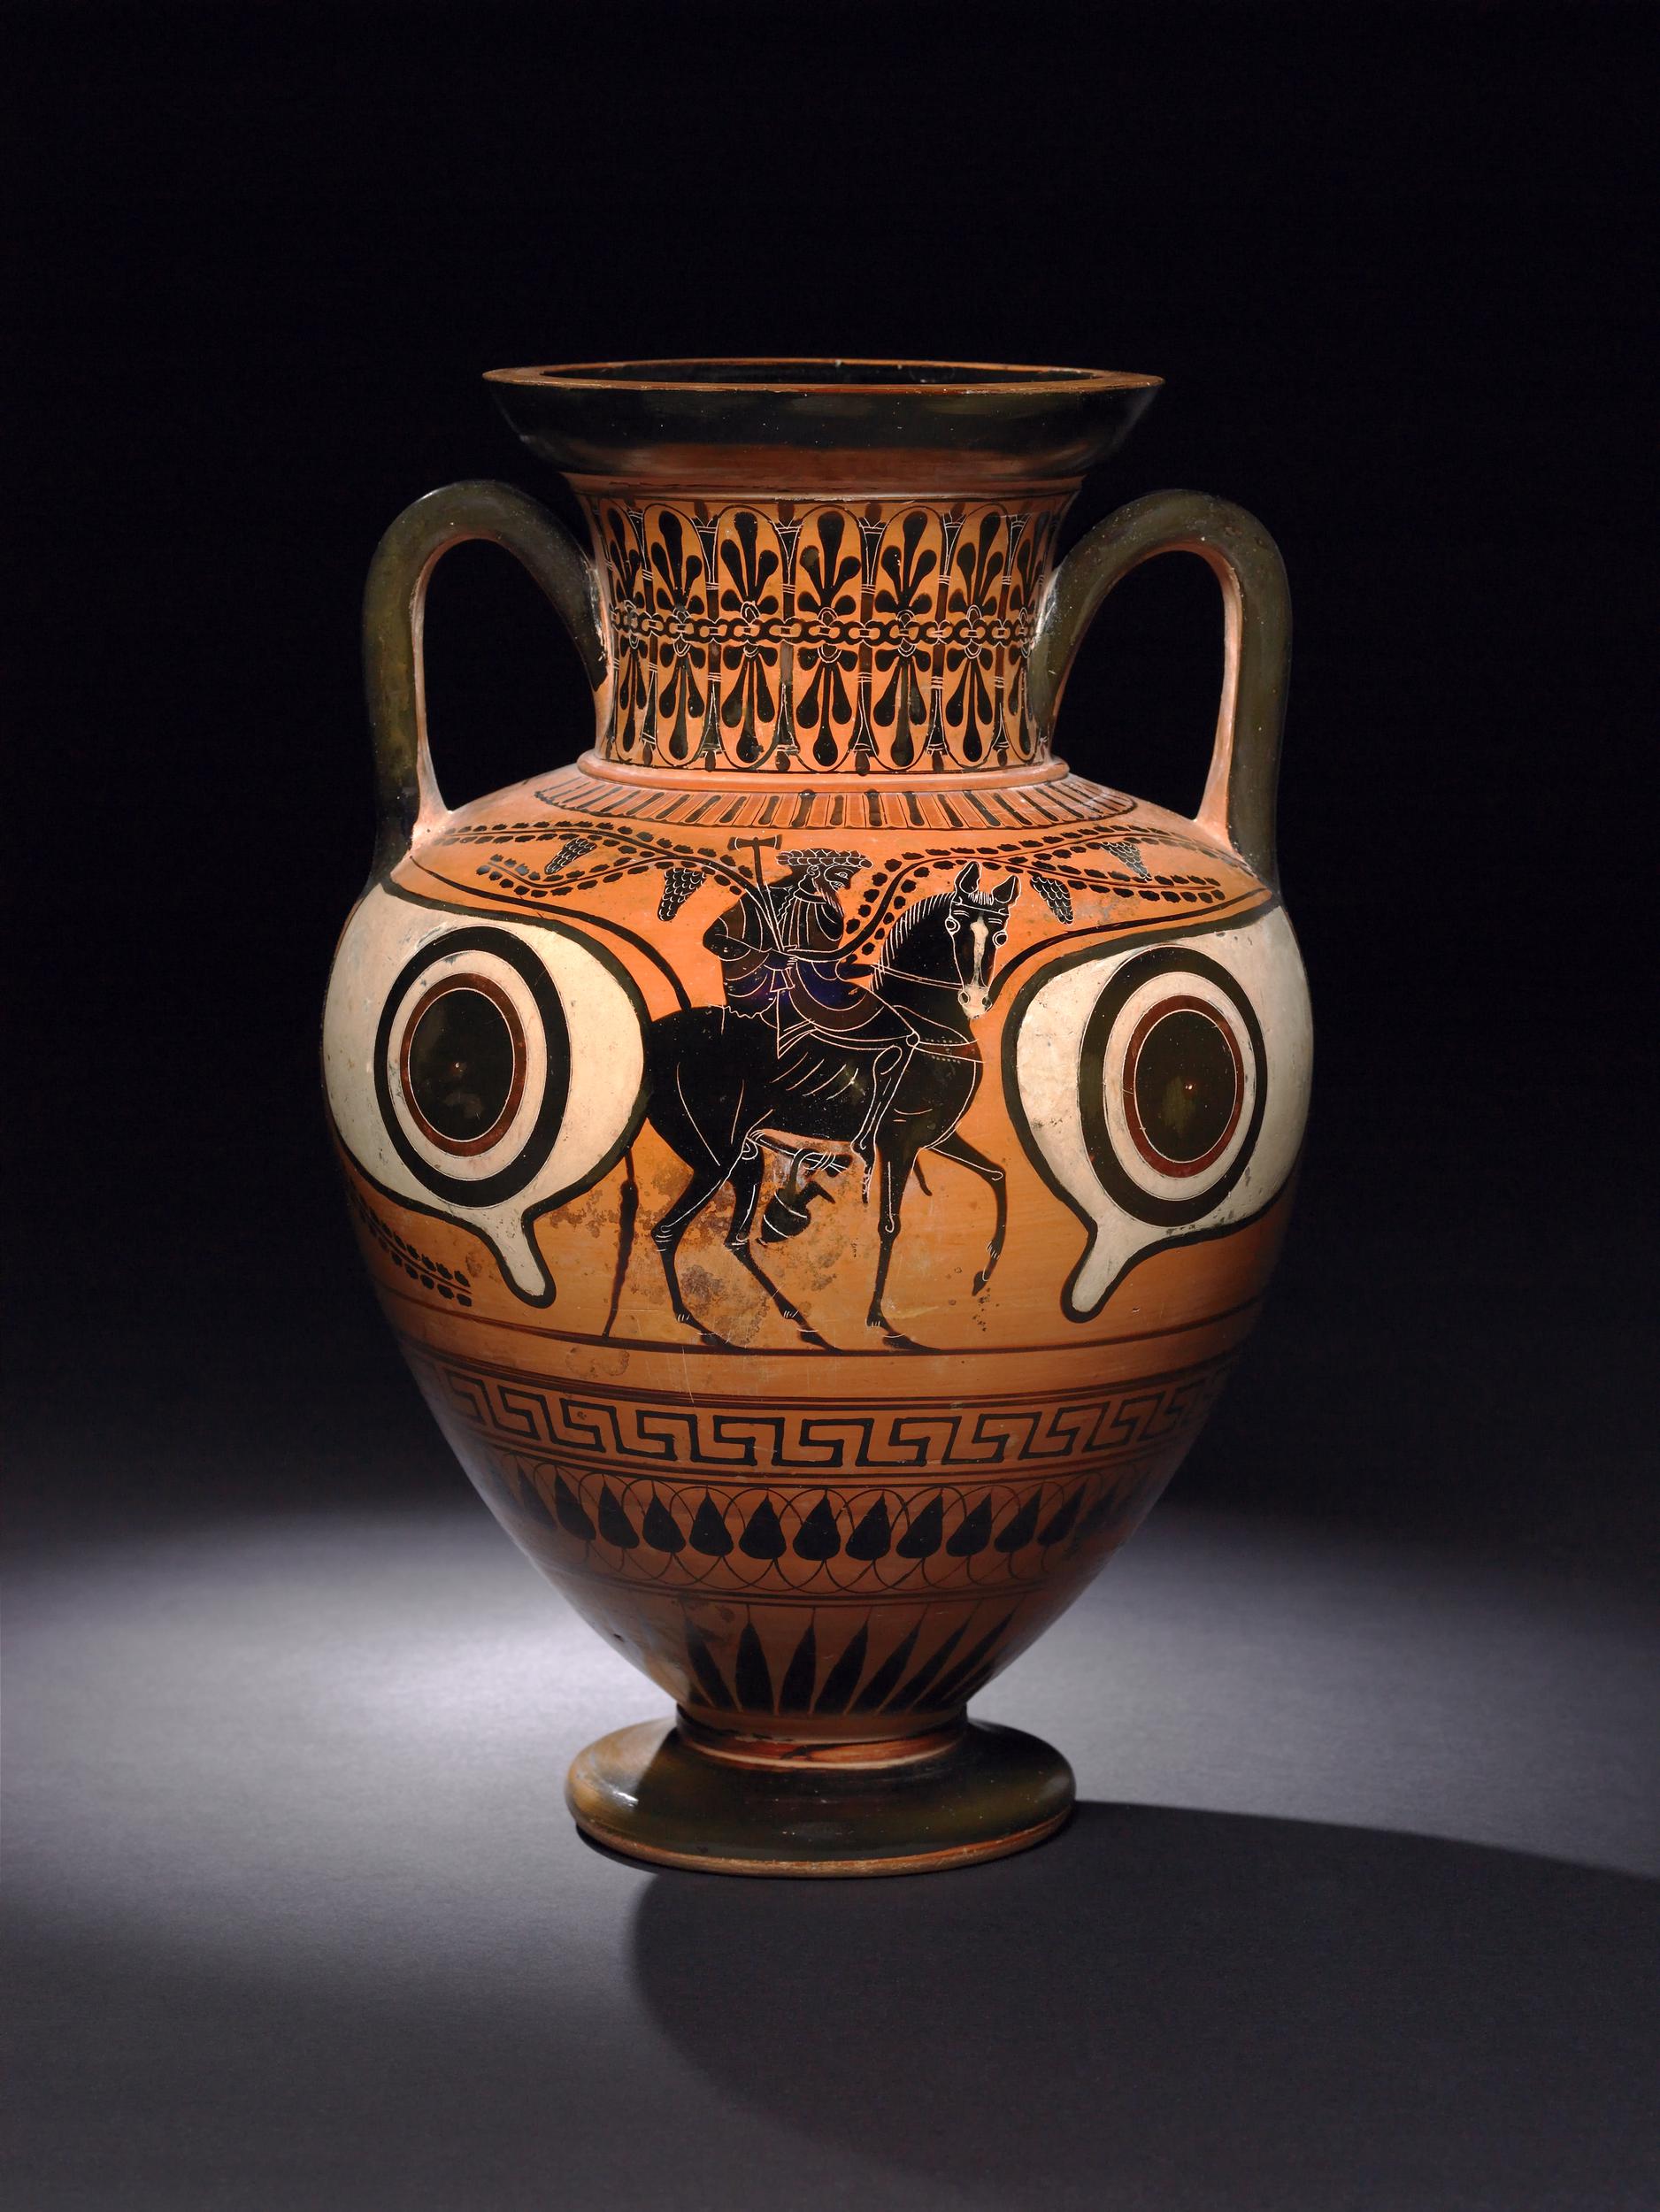 Hephaestus, bearded, crowned, and holding a hammer, rides a mule. Grapevines and a large pair of eyes surround Hephaestus.